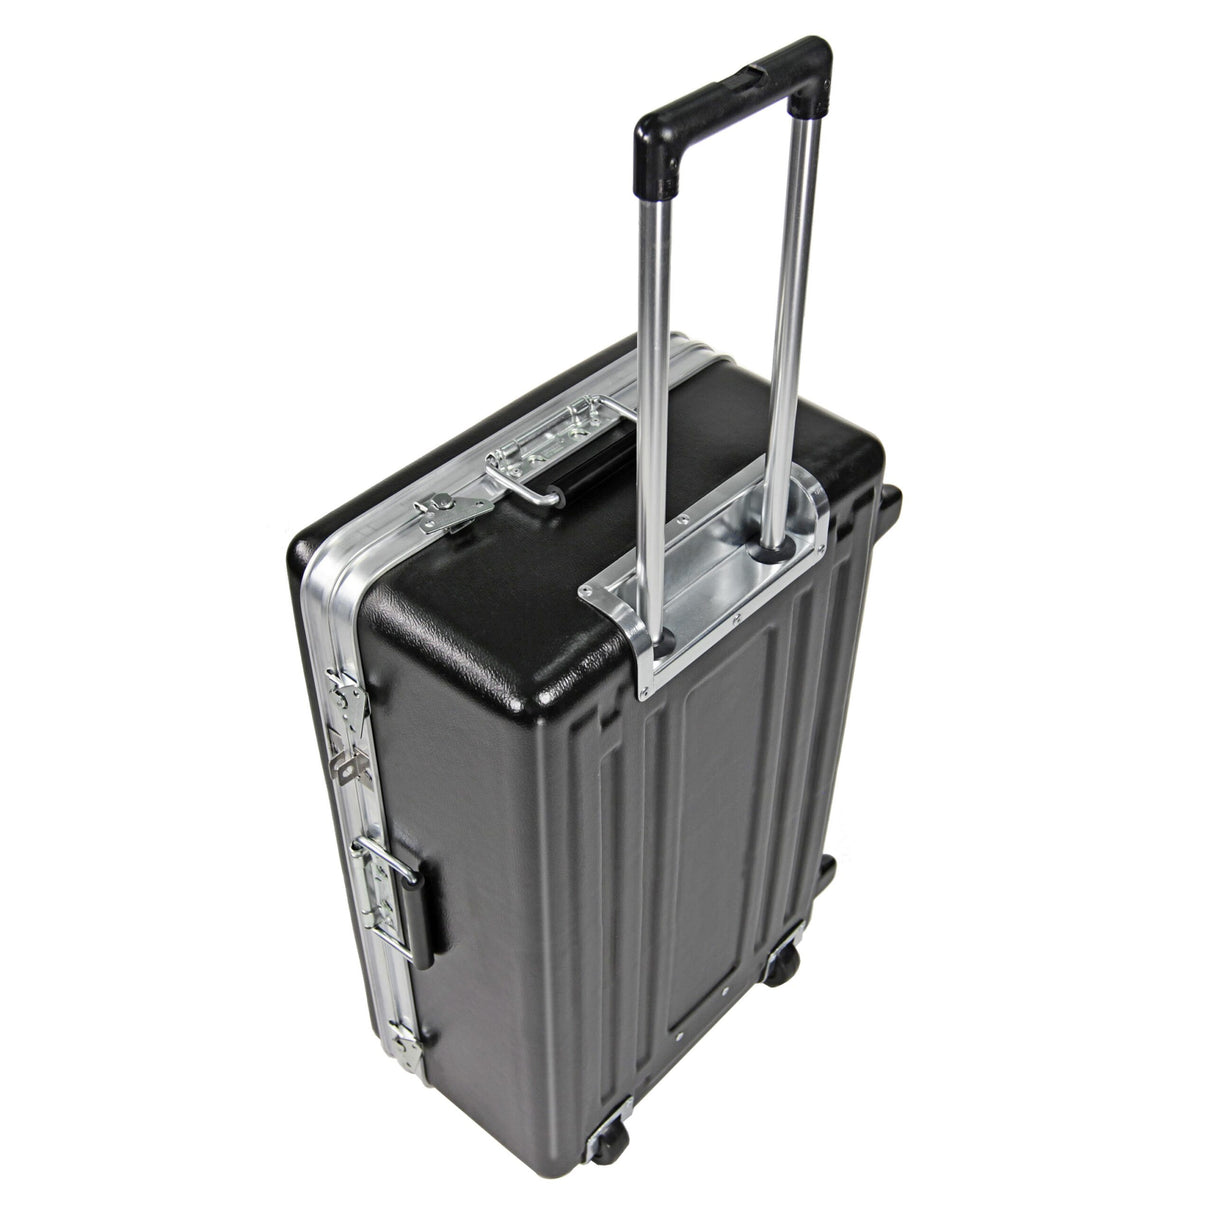 JVC CB-800 Hard Shipping Case for GY-HM800 and GY-HM700 Series